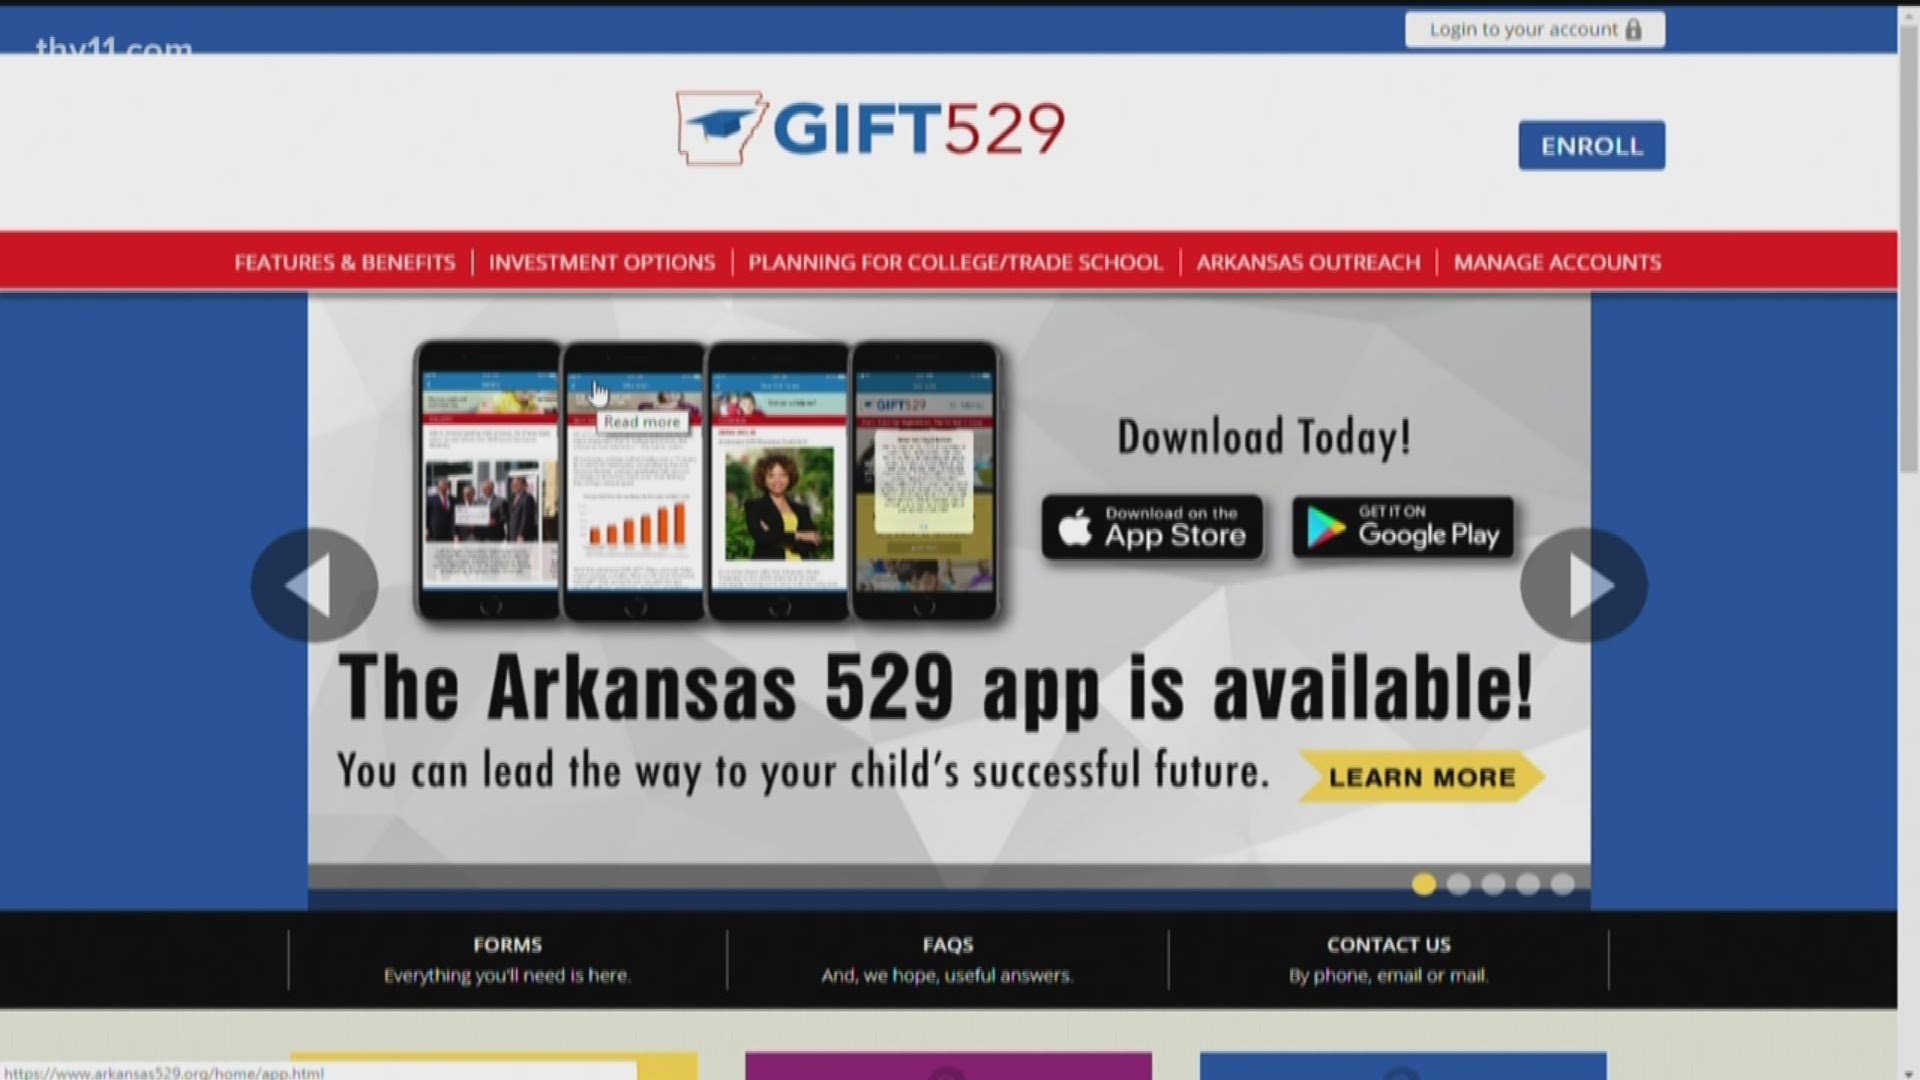 Gift 529 is a way to give a child the gift of the Arkansas 529 investing plan to pay for their education.